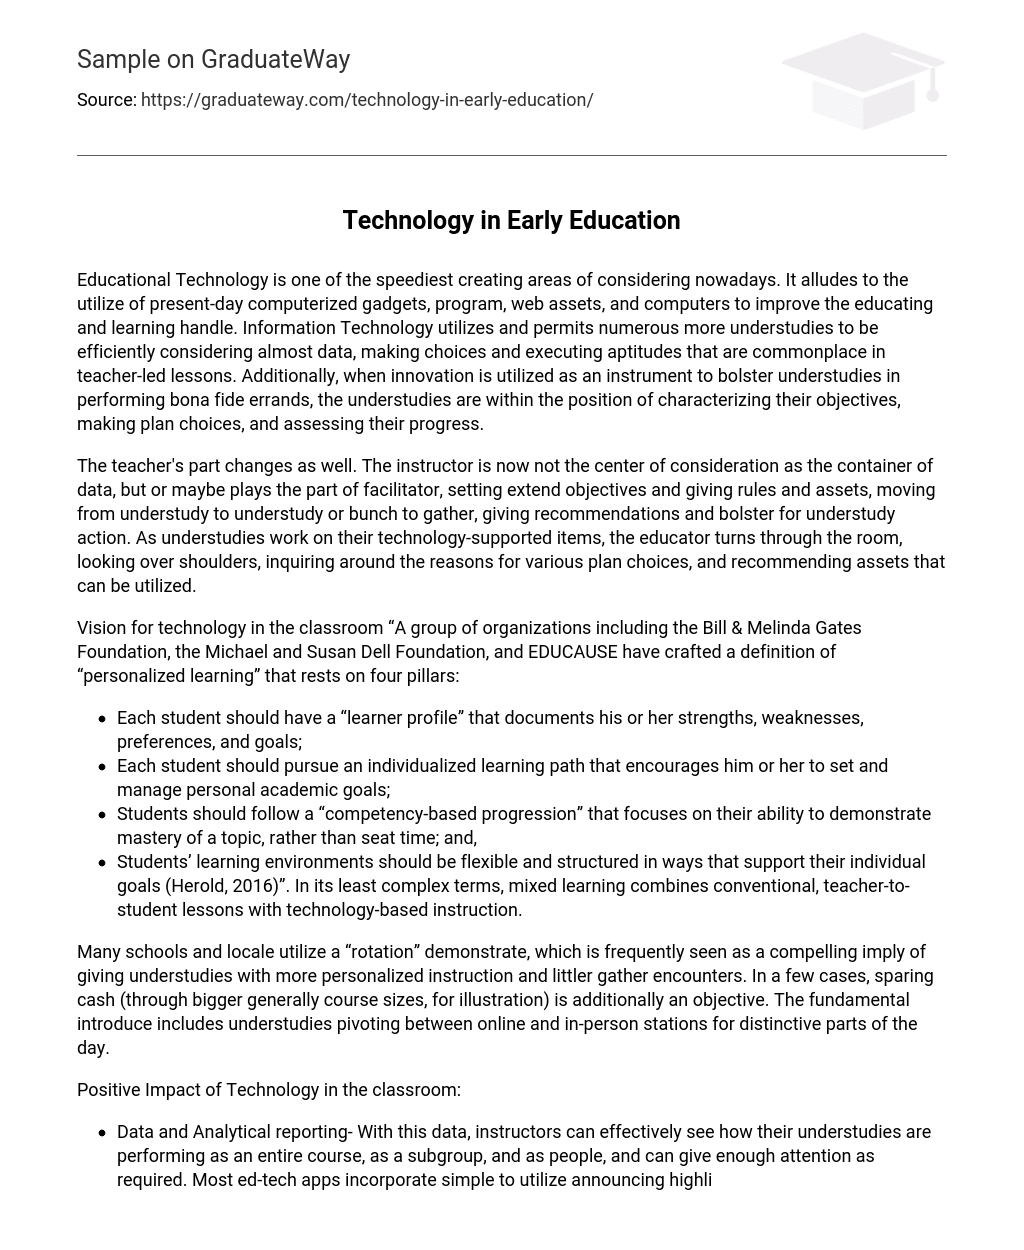 Technology in Early Education